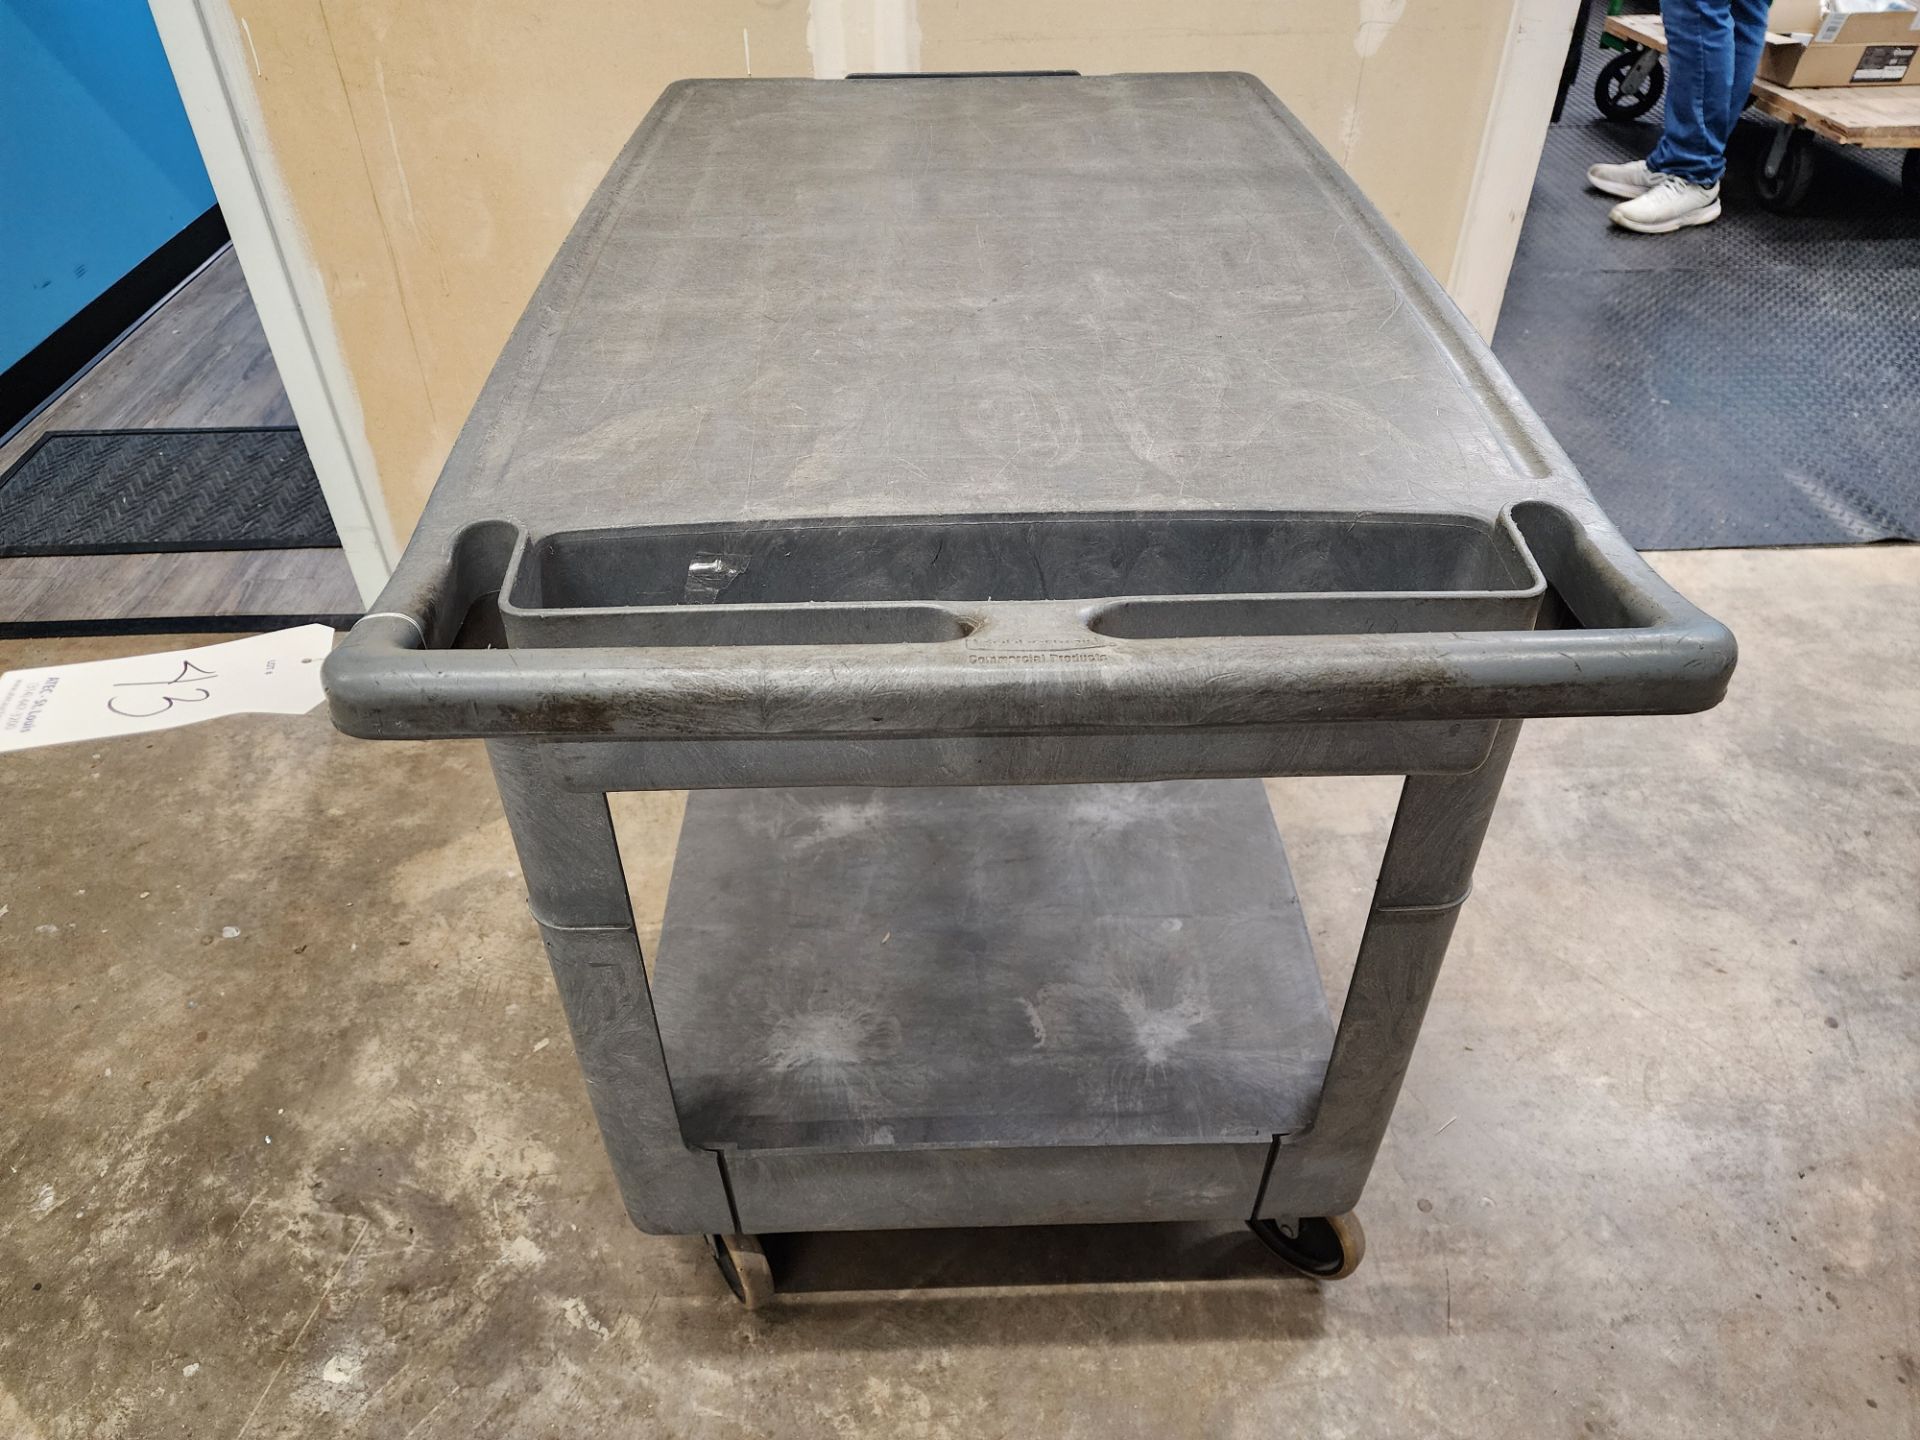 Gray Rubbermaid Utility Cart, 2-Tier, 25"x36" - Image 2 of 3